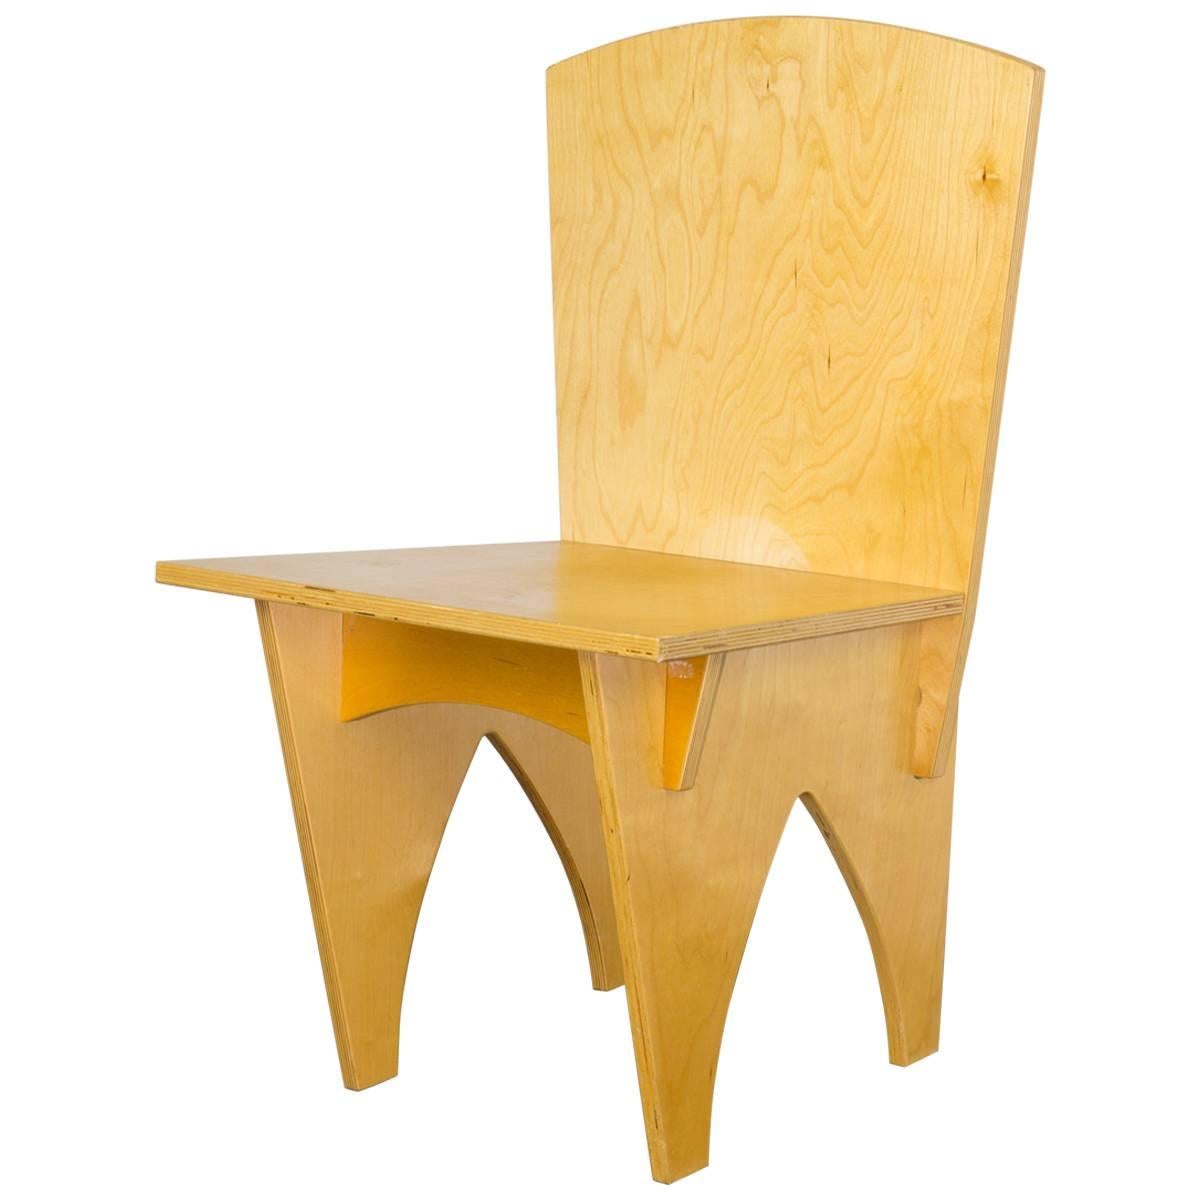 Interlocked Plywood Chair For Sale